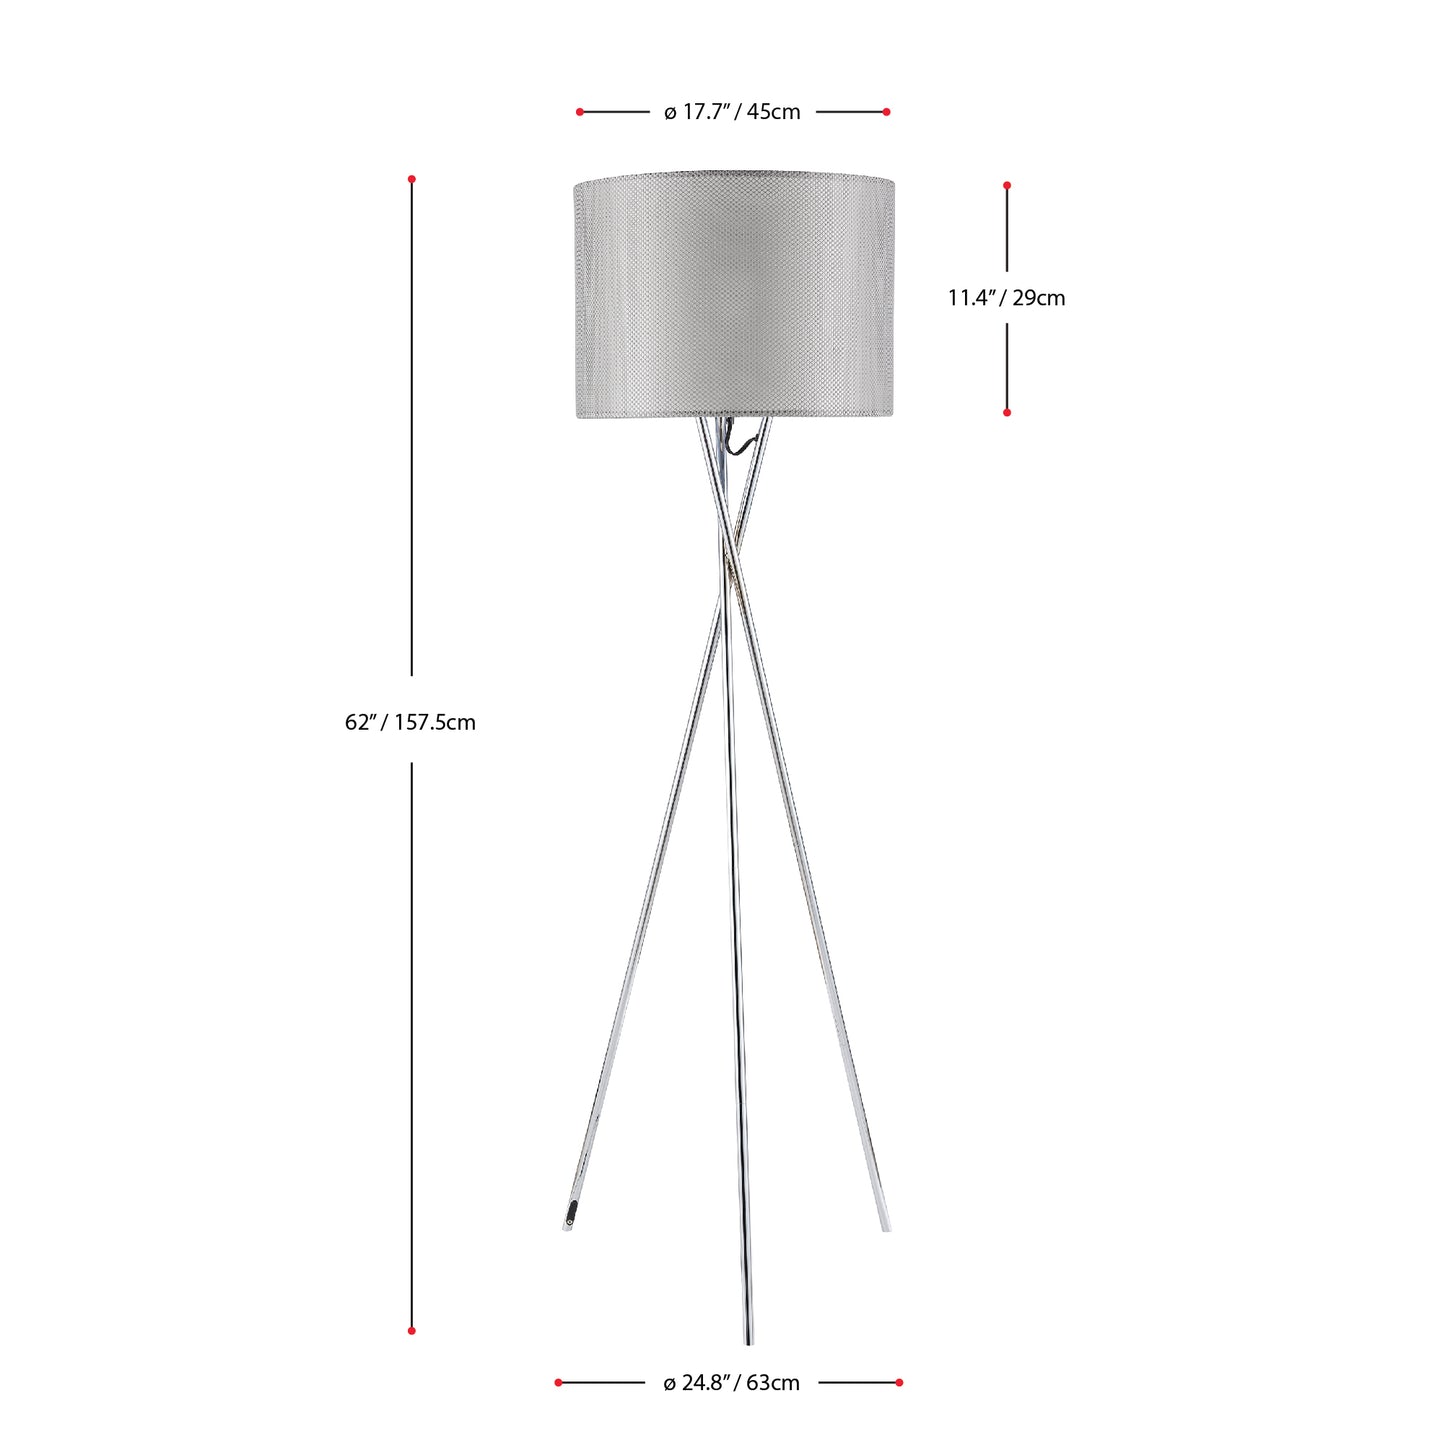 Amlight 62 inch Lisboa Tripod Floor Lamp  with Metal Chrome Tripod and Grey Mesh Fabric On Frosted Film Shade